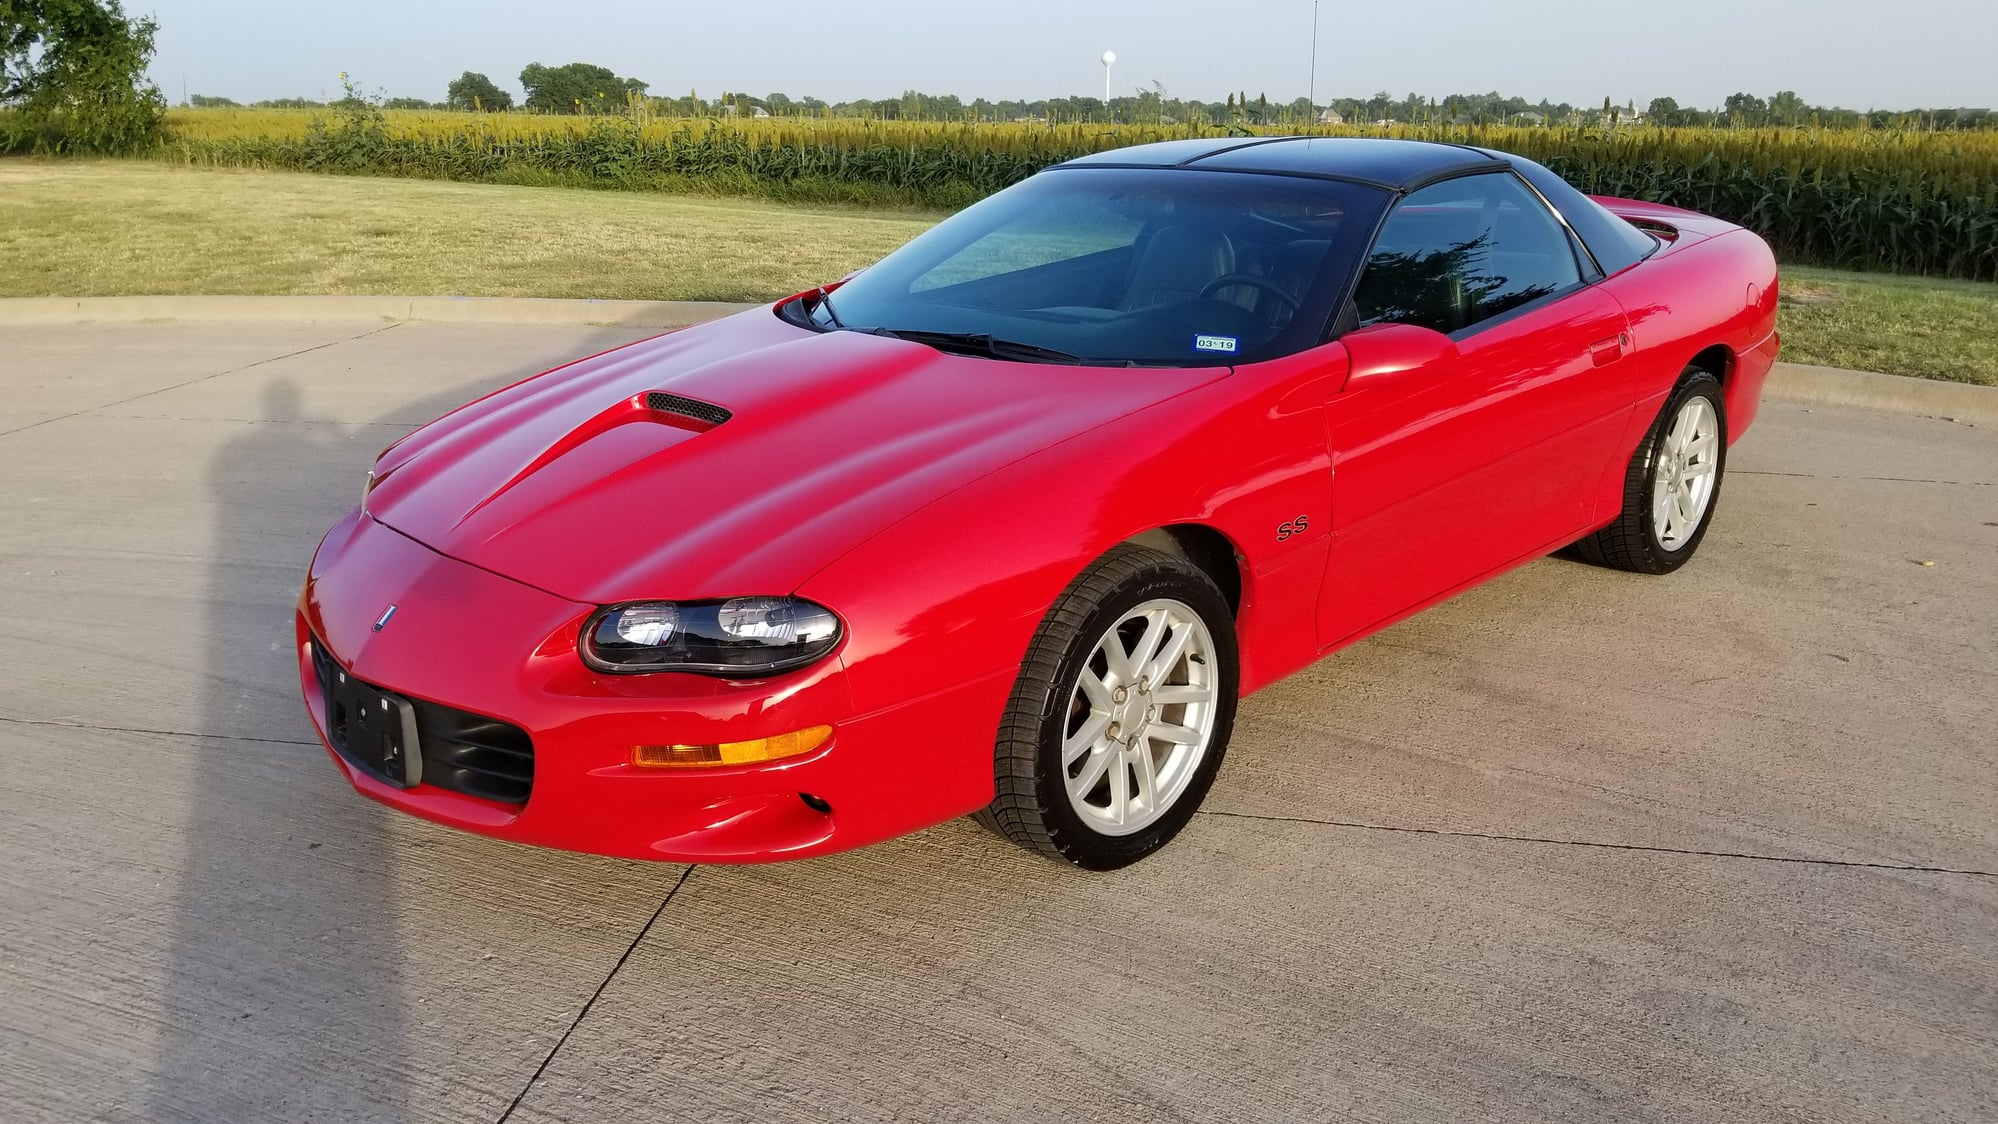 2000 Chevrolet Camaro - 2000 Chevrolet Camaro SS - Used - VIN 2G1FP22GXY2111248 - 72,152 Miles - 8 cyl - 2WD - Manual - Coupe - Red - Rockwall, TX 75087, United States